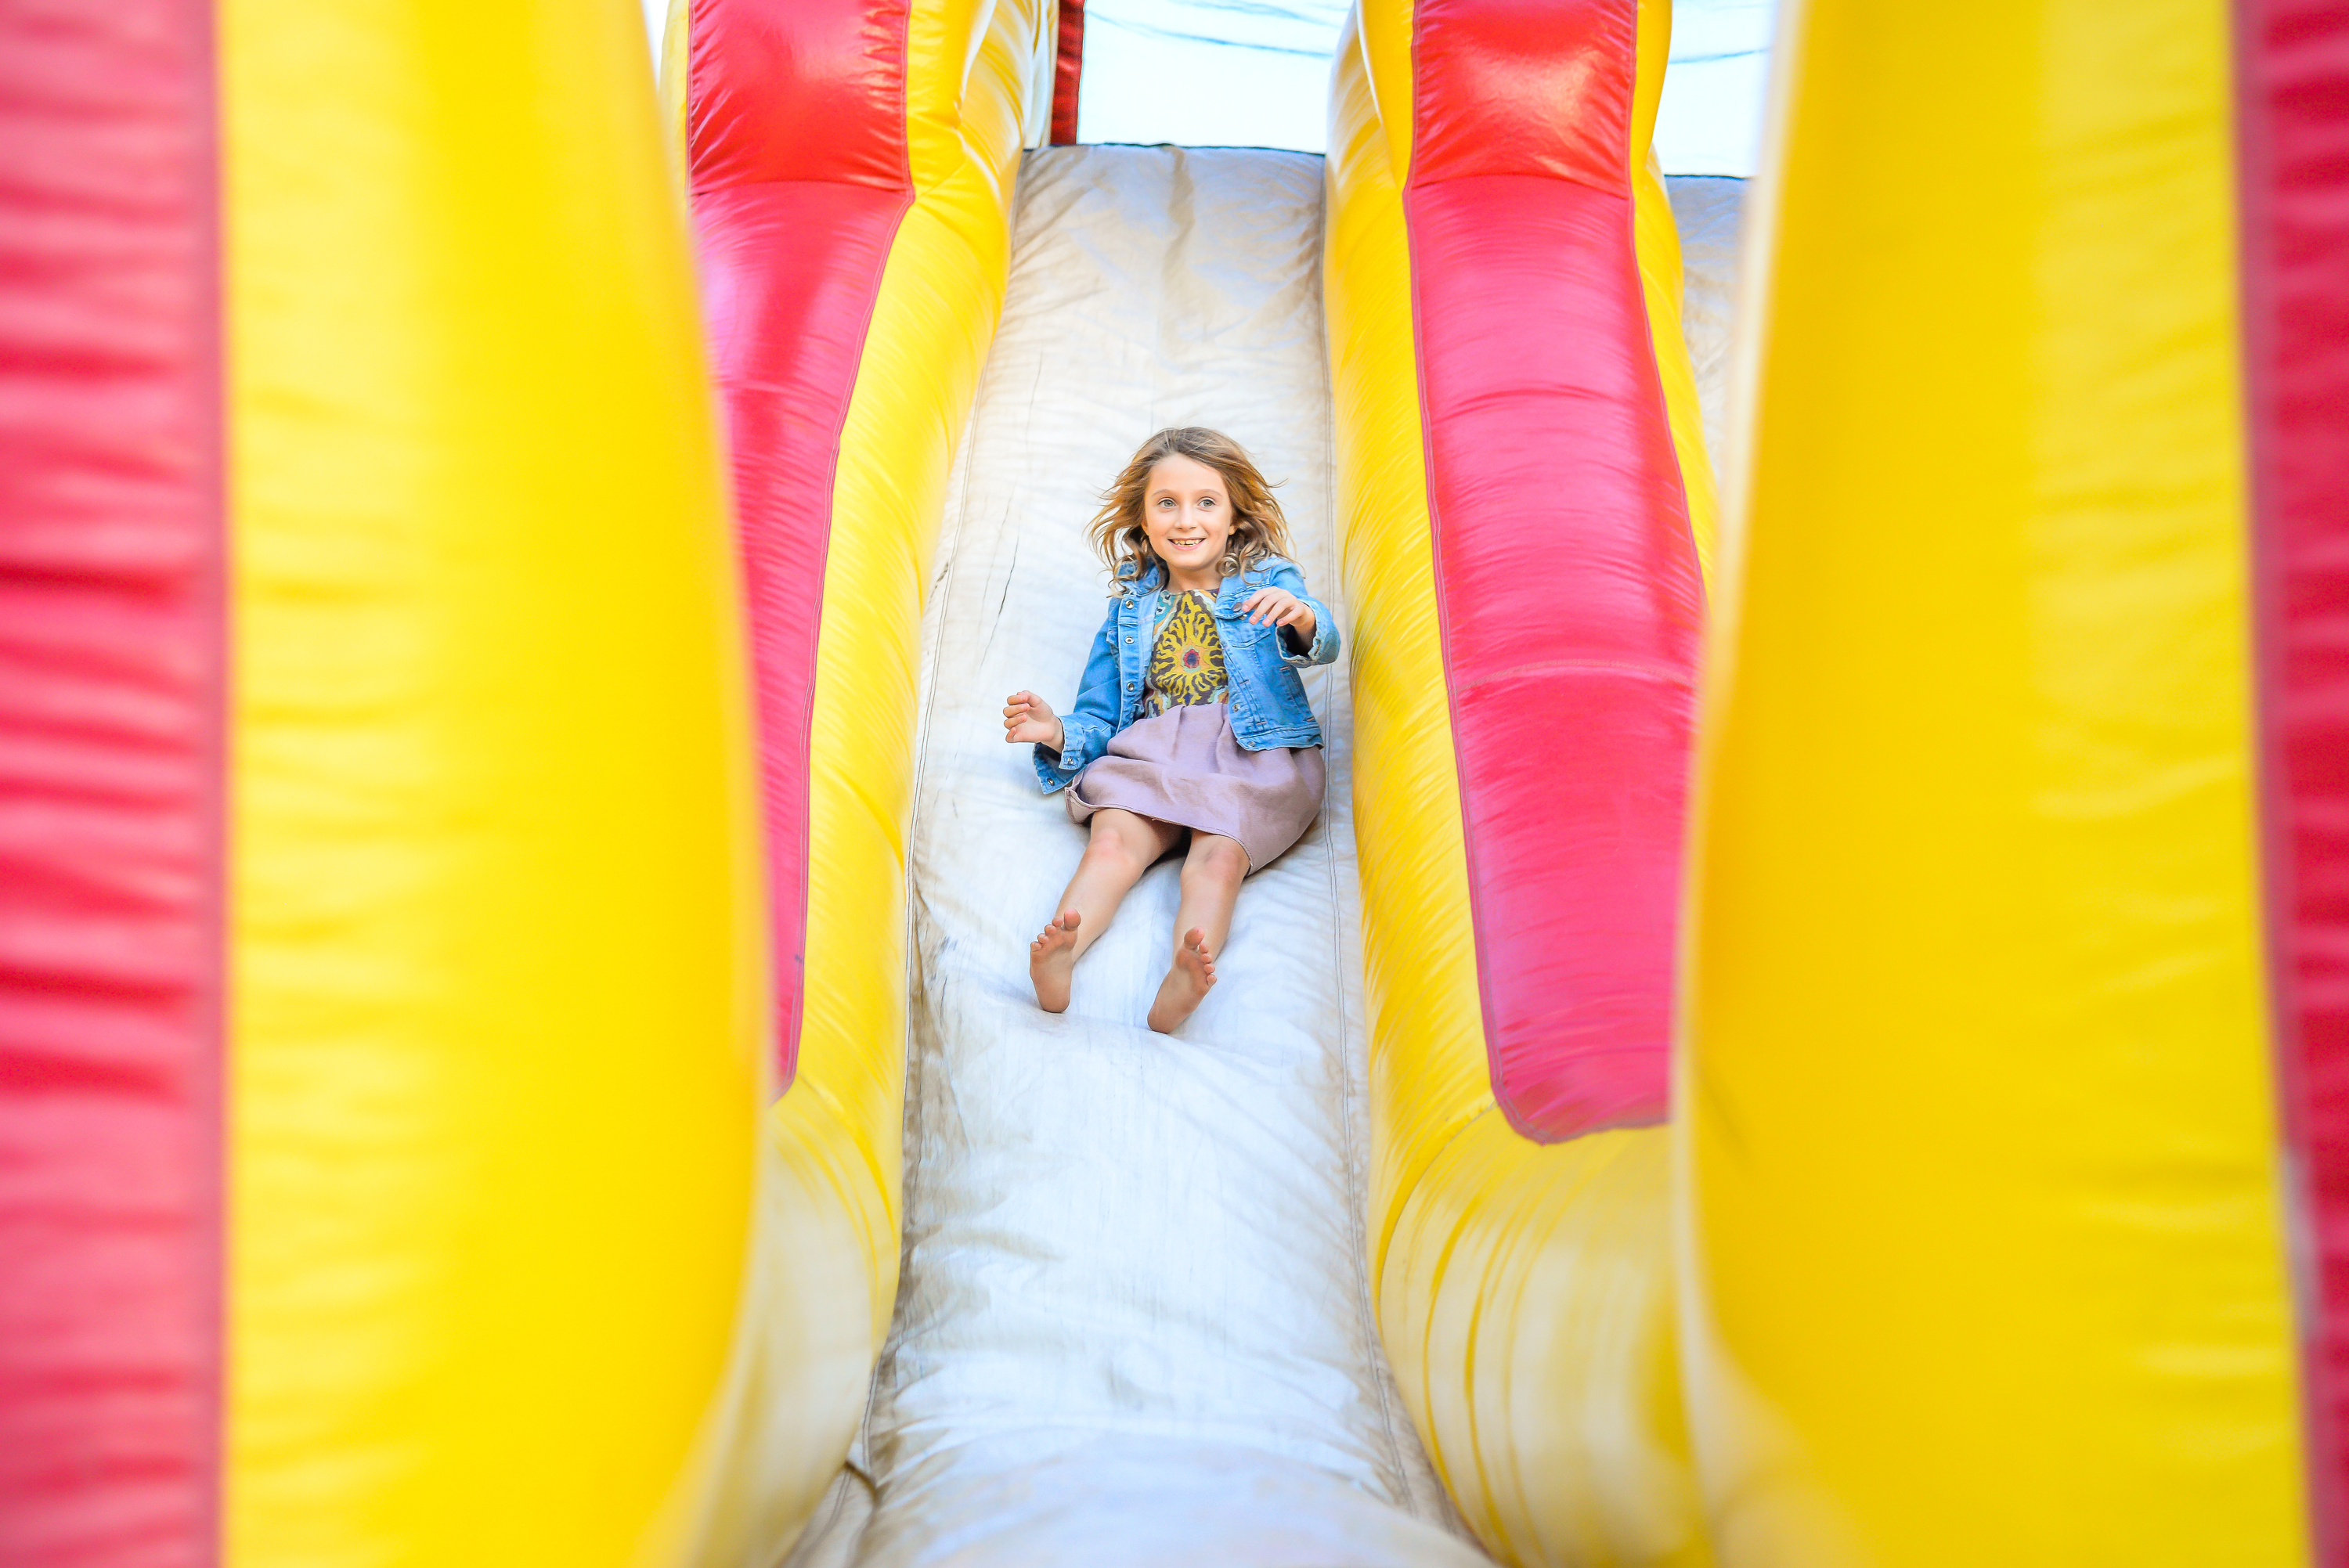 Rent a Bounce House in Southington CT